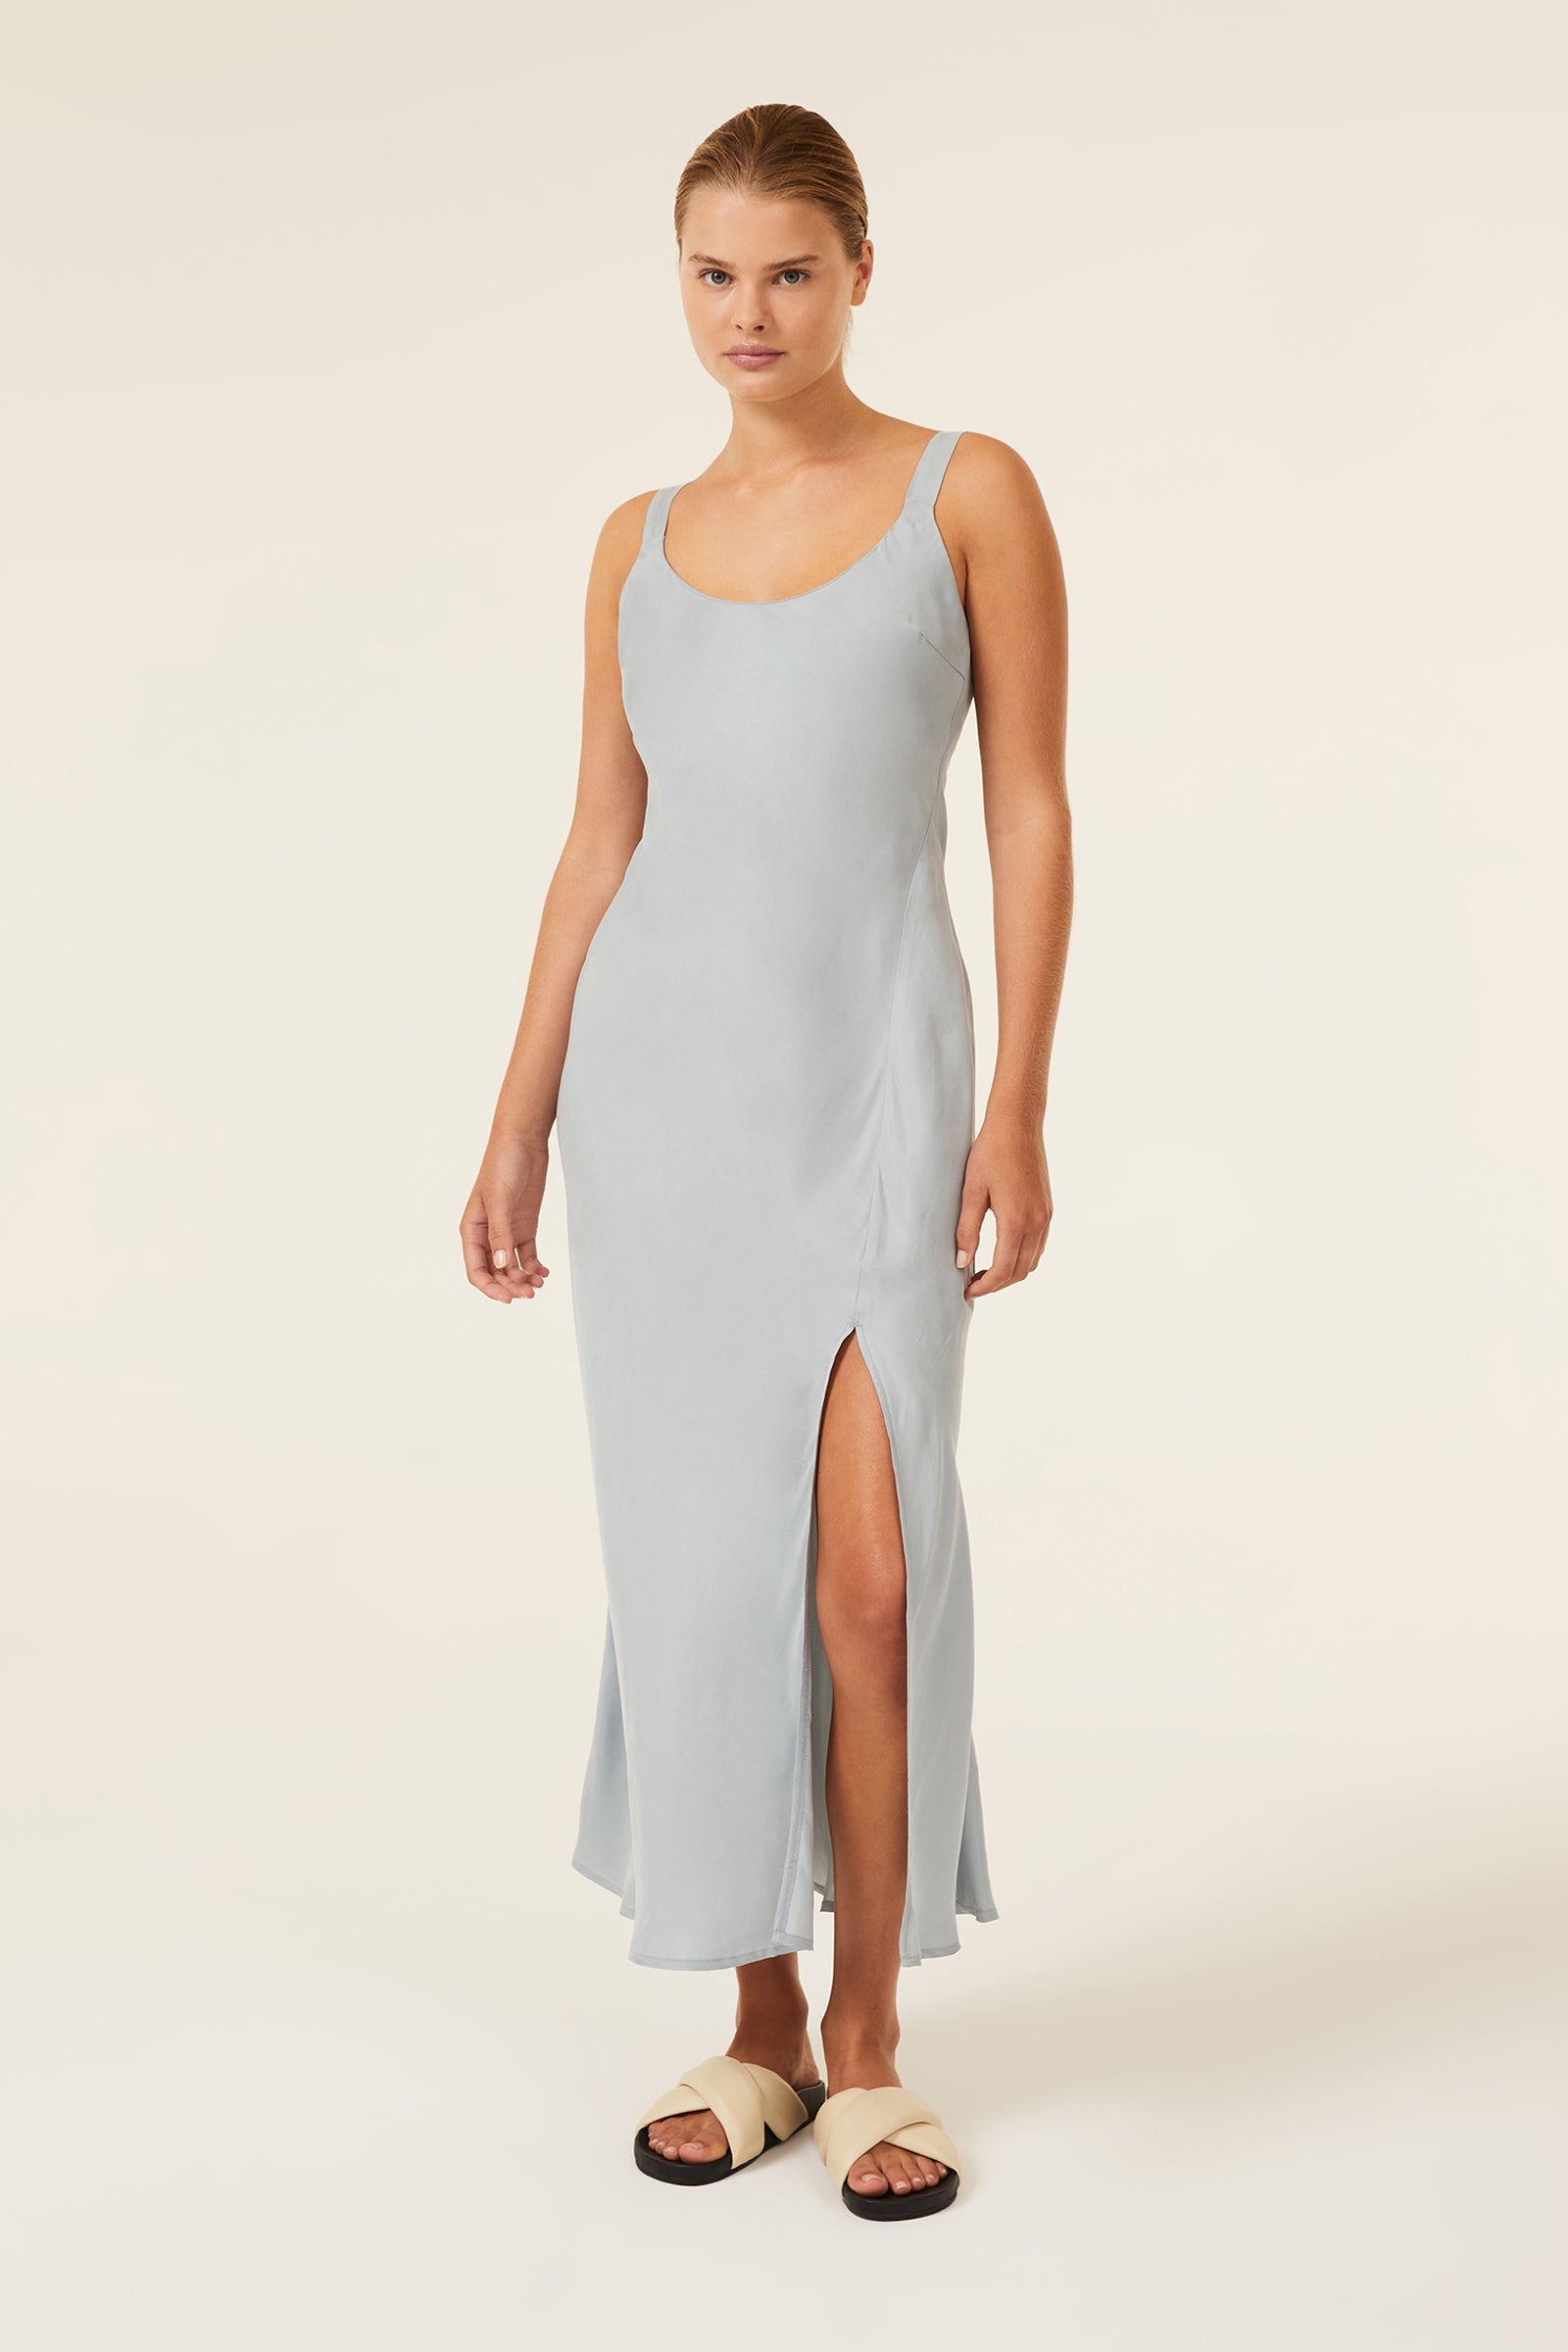 Nude Lucy Harlow Cupro Slip Dress In a Green & Blue Toned Marine Colour